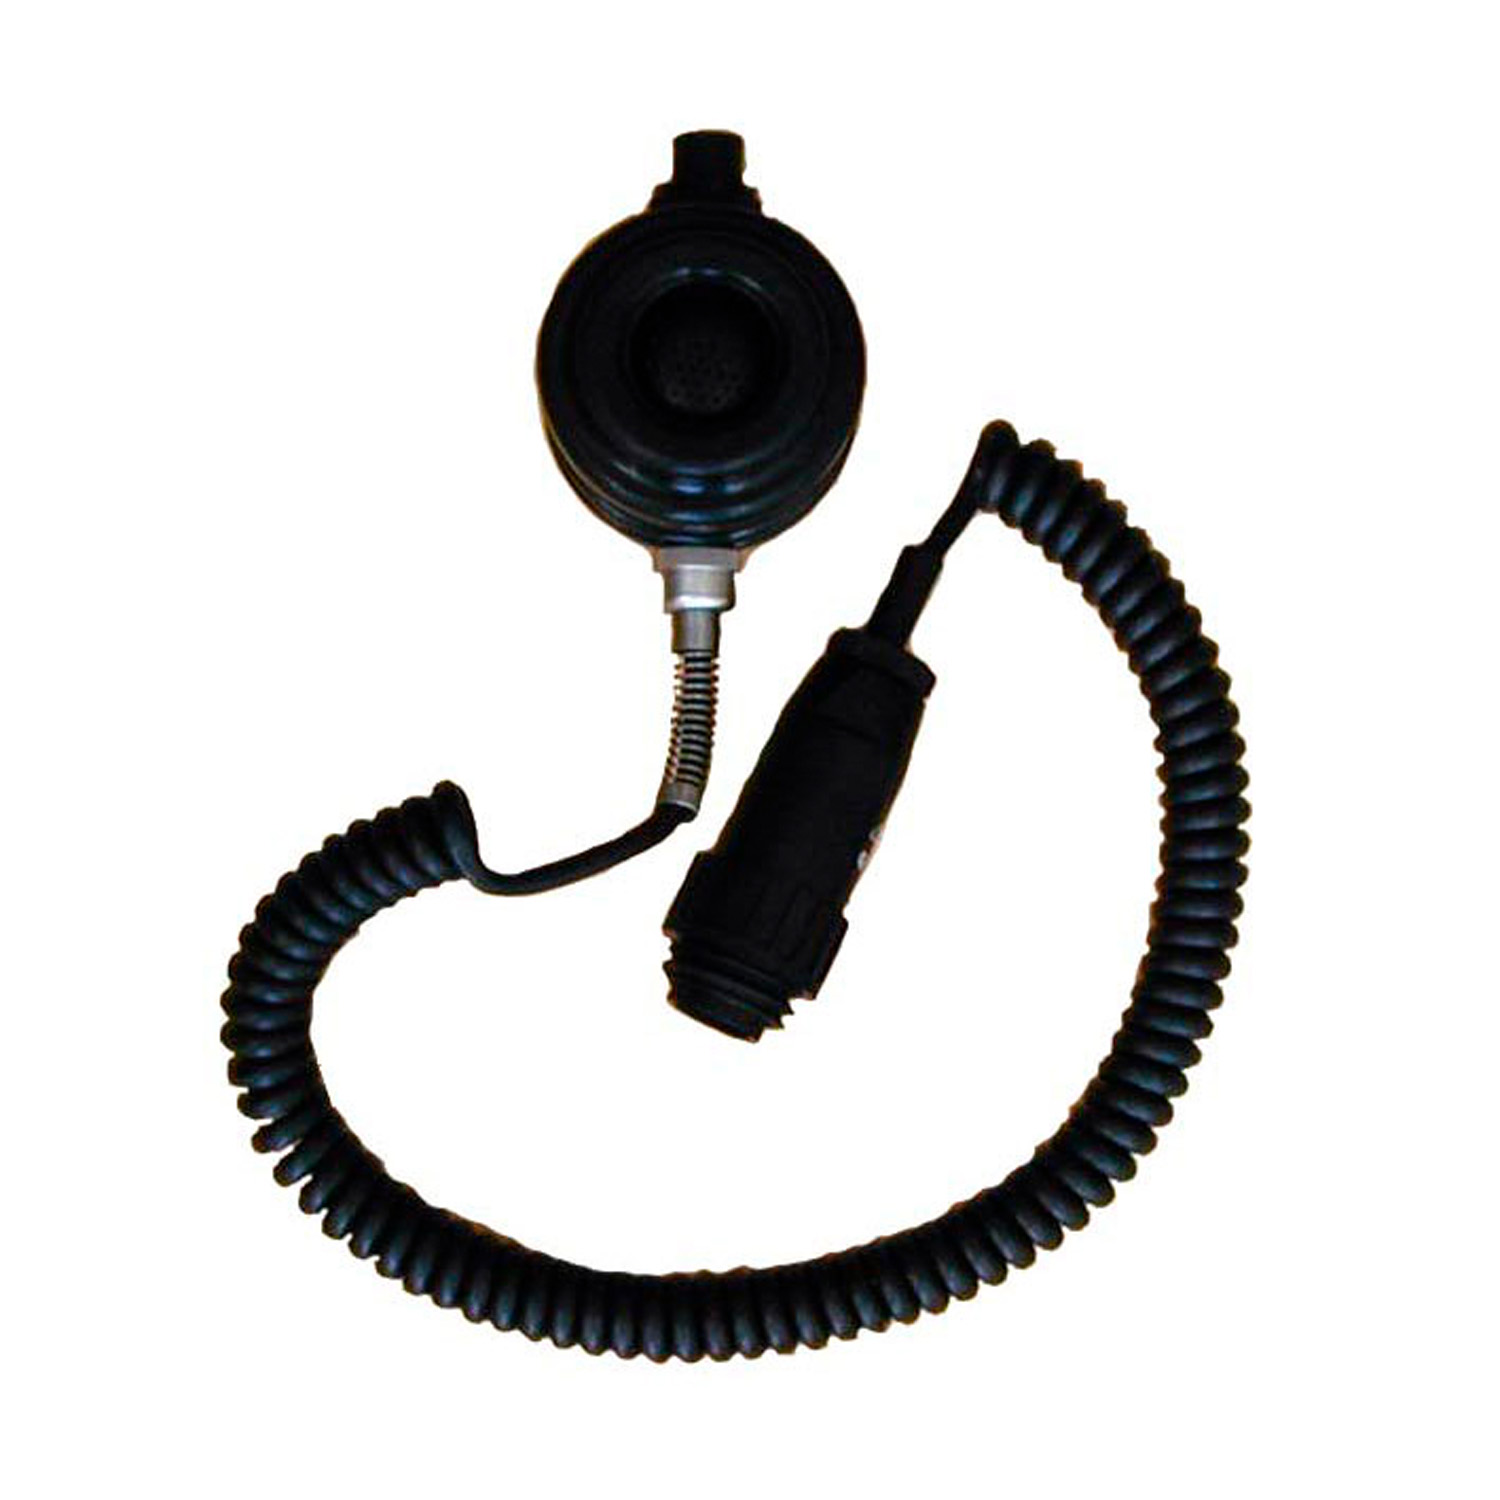 3005020039 P66 Microphone with PTT button and 2m cable and 4 pins plug IP66